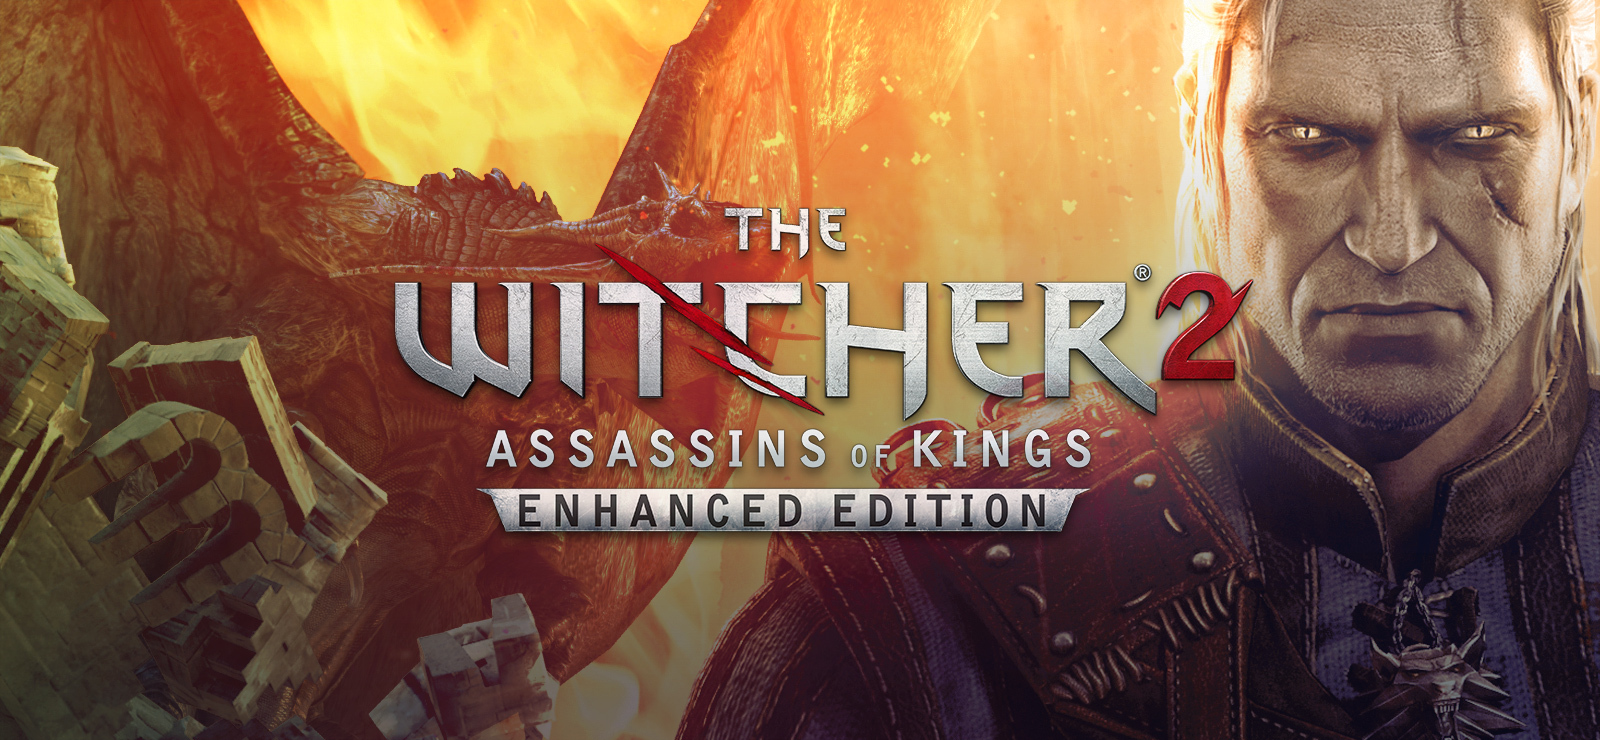 The Witcher 2 Assassins Of Kings free Download PC Game (Full Version)